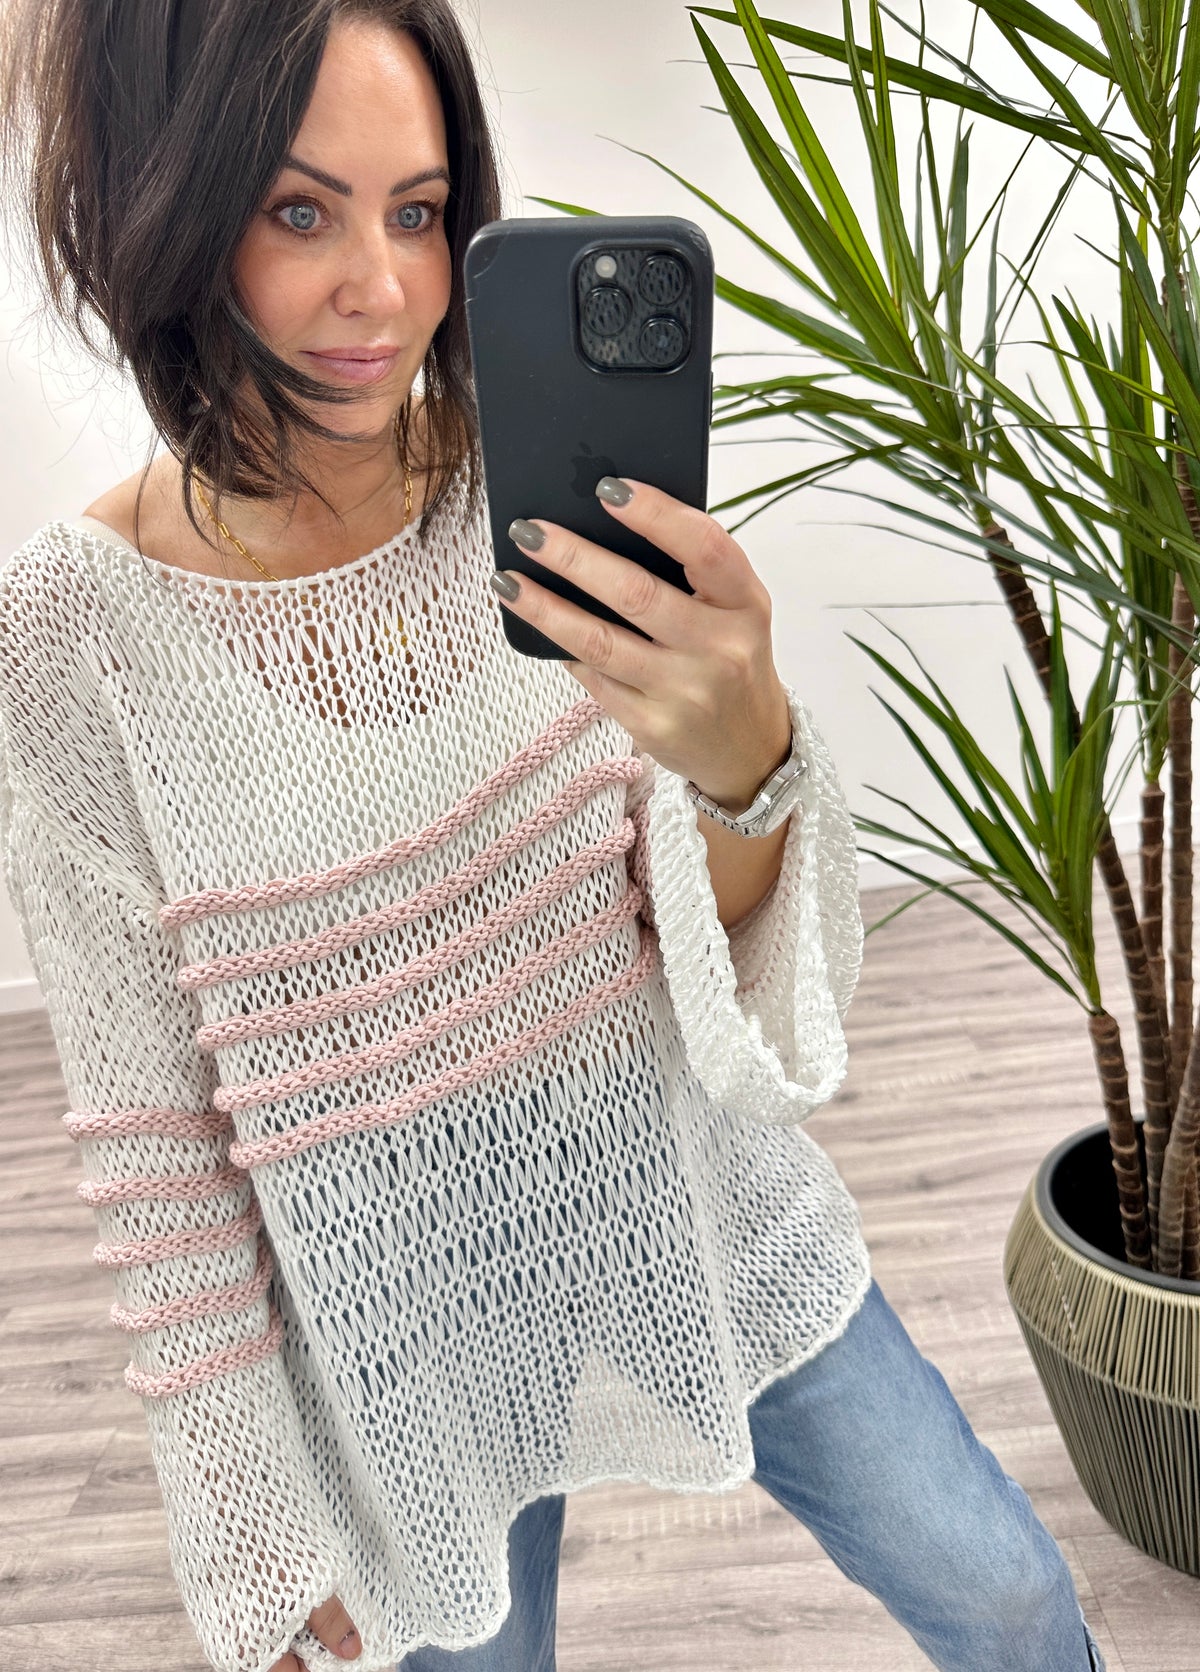 The Marbella Stripe Knit - Baby Pink